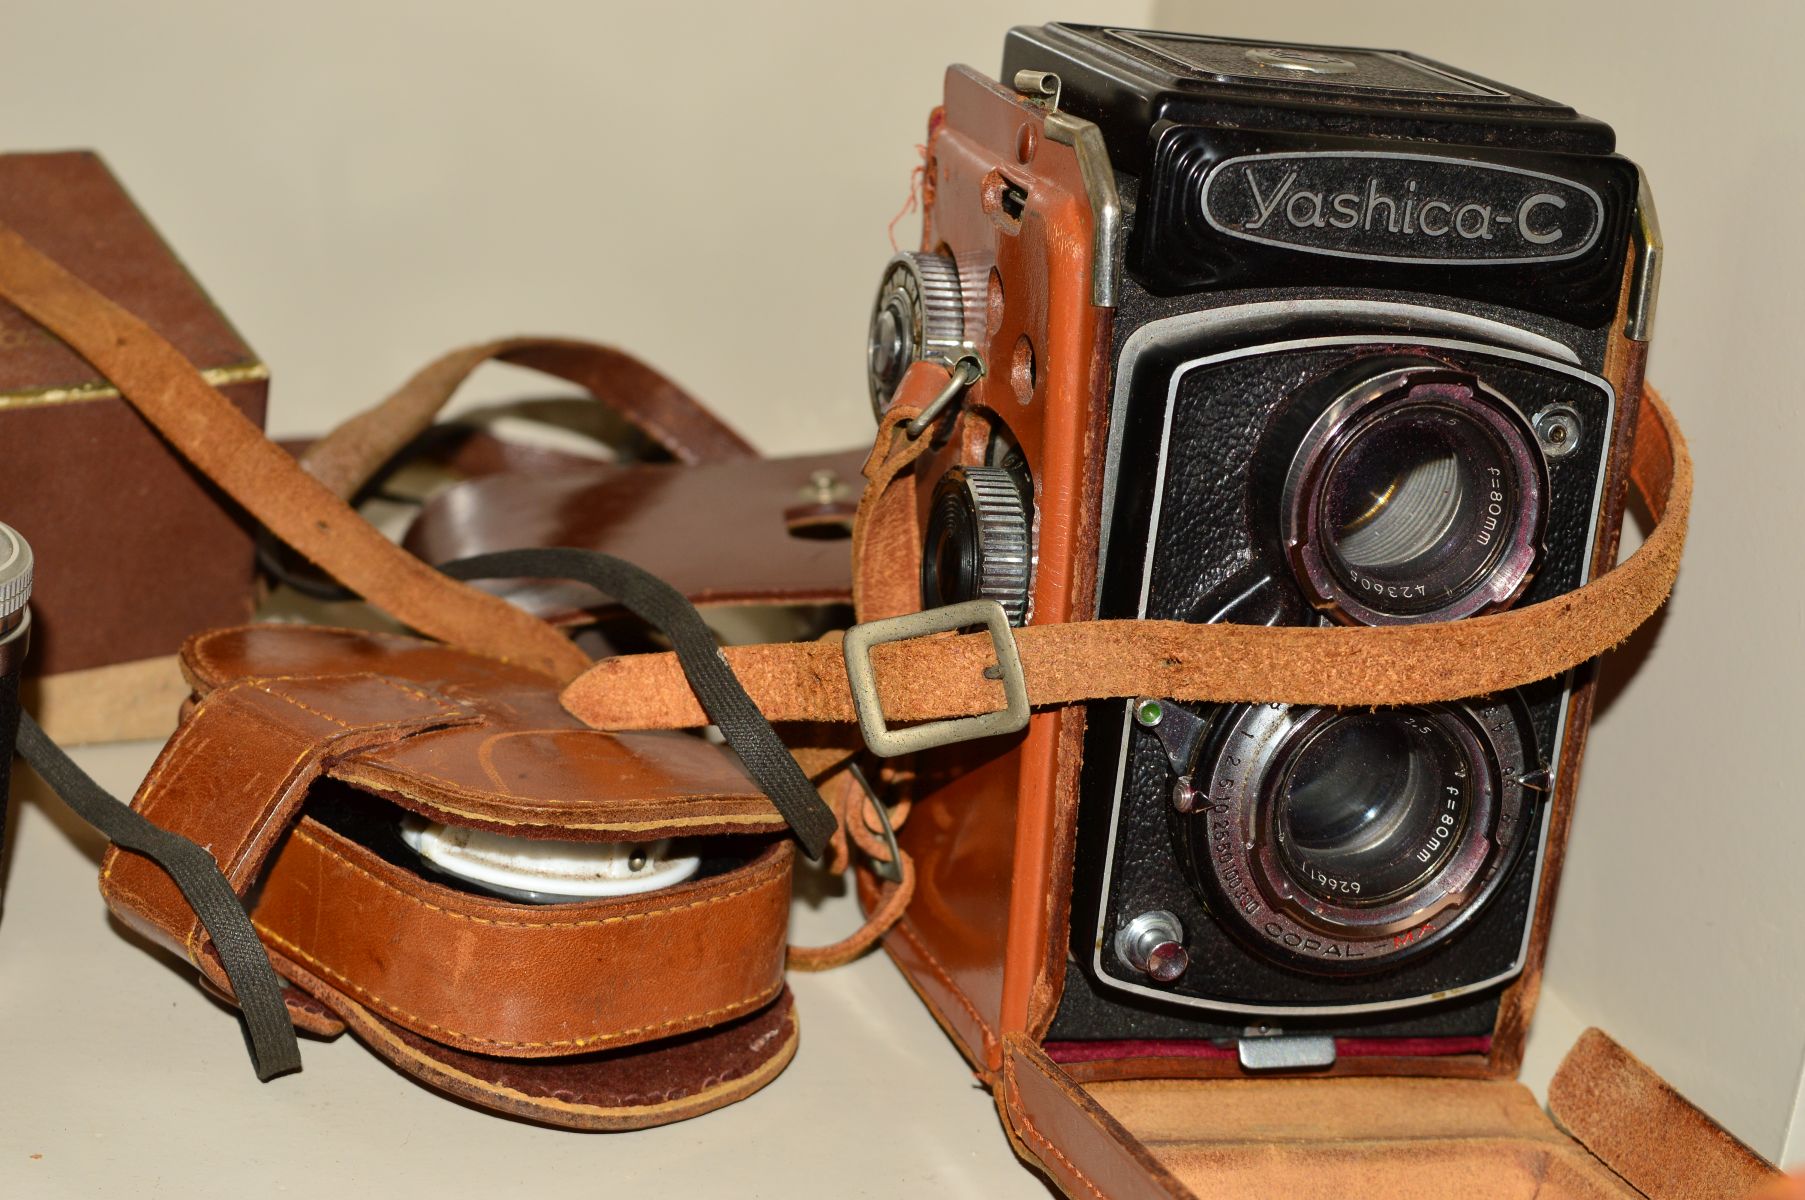 A COLLECTION OF VINTAGE CAMERAS including a Yashica C TLR, a Cosina PM-1 SLR, a boxed Braun Super - Image 4 of 4